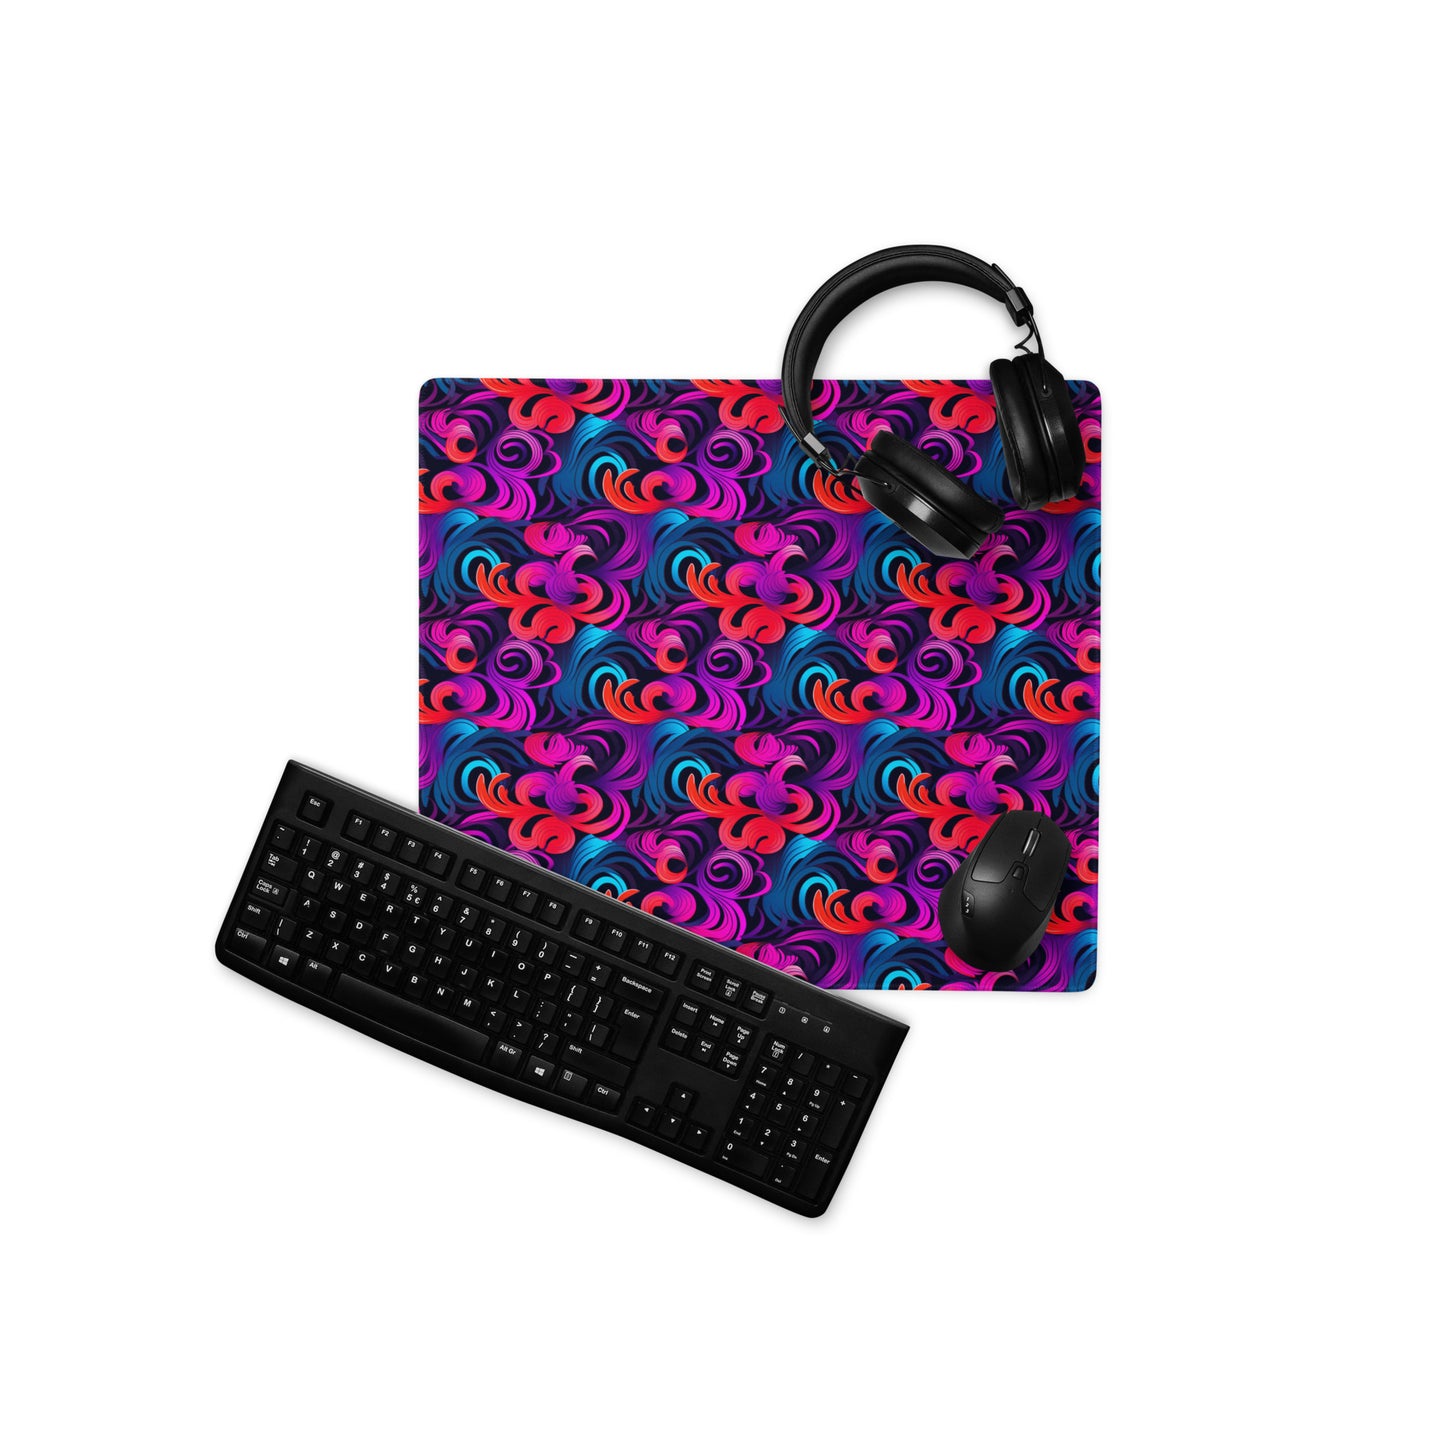 An 18" x 16" desk pad with a bright floral pattern all over it displayed with a keyboard, headphones and a mouse. Blue, Purple and Red in color.